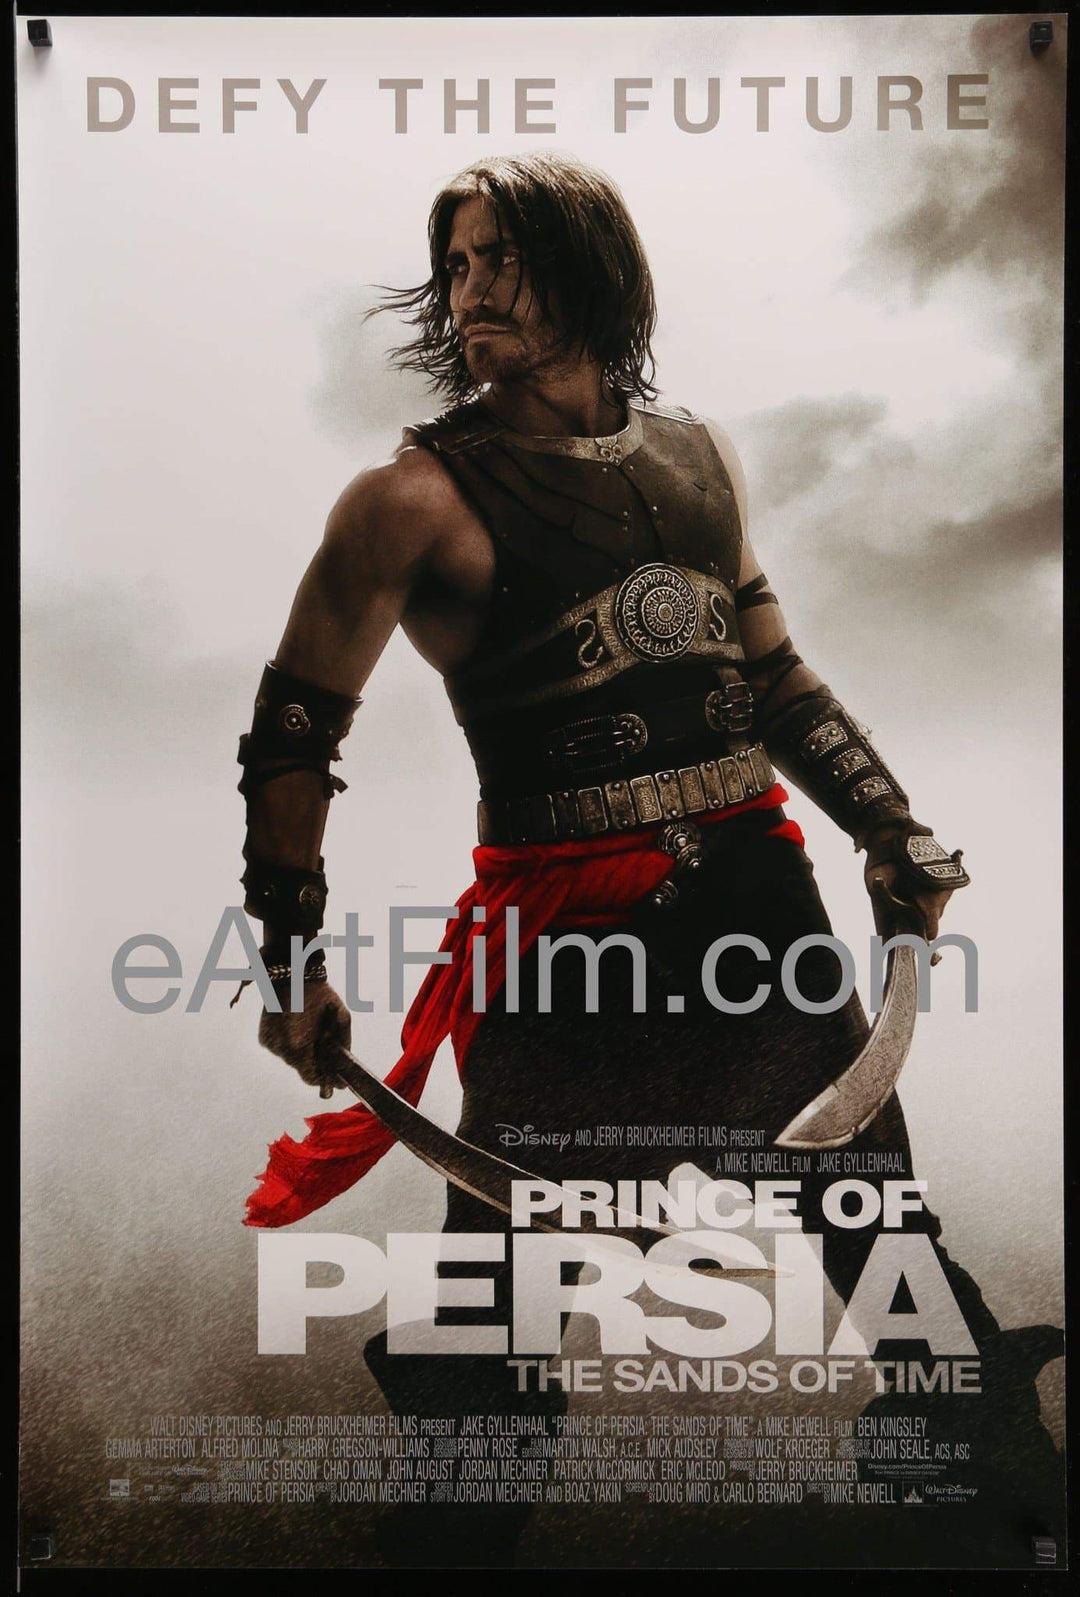 eArtFilm.com U.S Unfolded International Double Sided One Sheet (27"x40")-Original-Vintage-Movie-Poster Prince Of Persia The Sands of Time 2010 27x40 International One Sheet United States